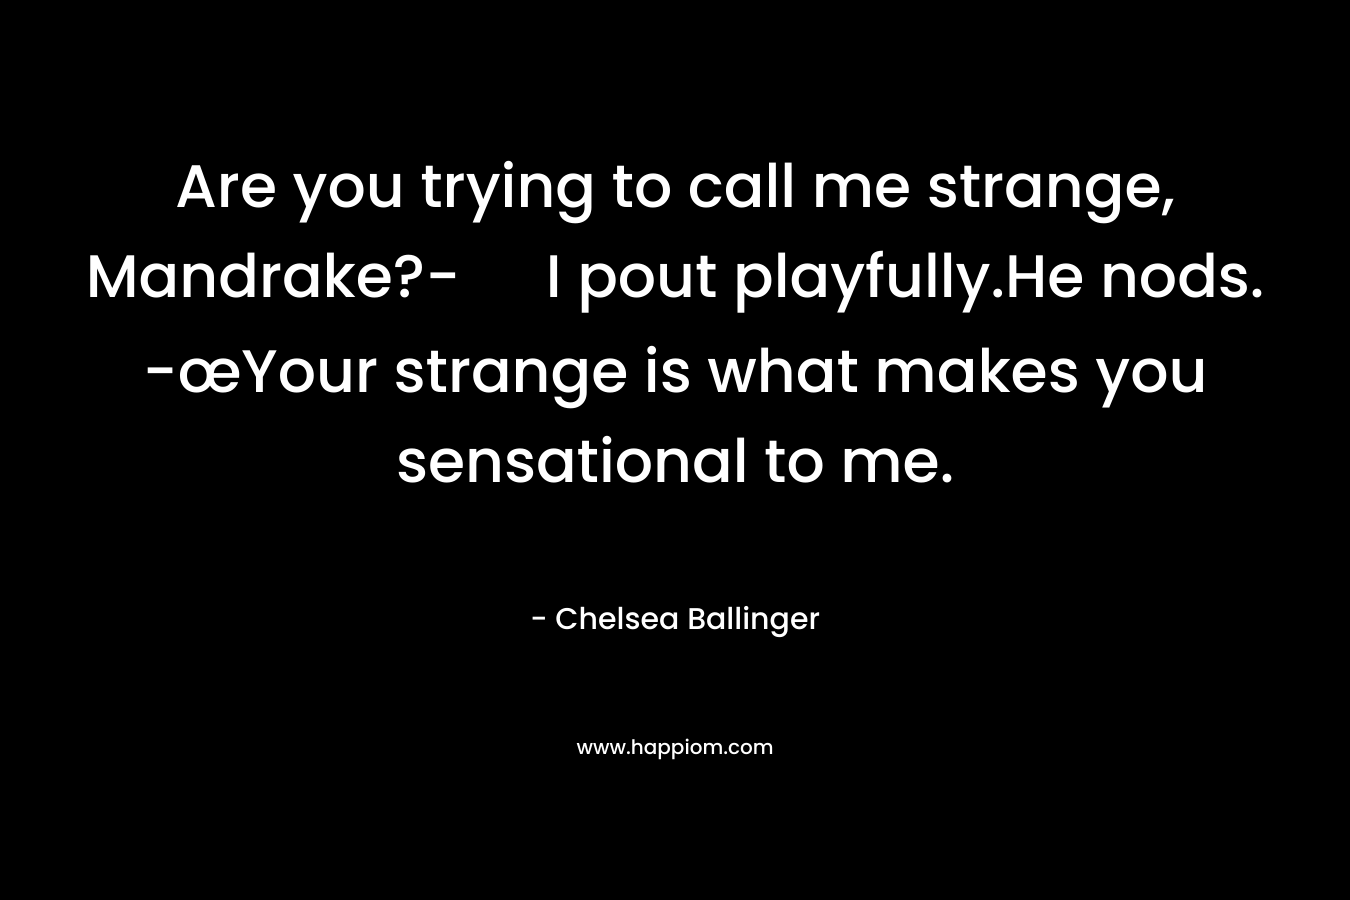 Are you trying to call me strange, Mandrake?- I pout playfully.He nods. -œYour strange is what makes you sensational to me. – Chelsea Ballinger